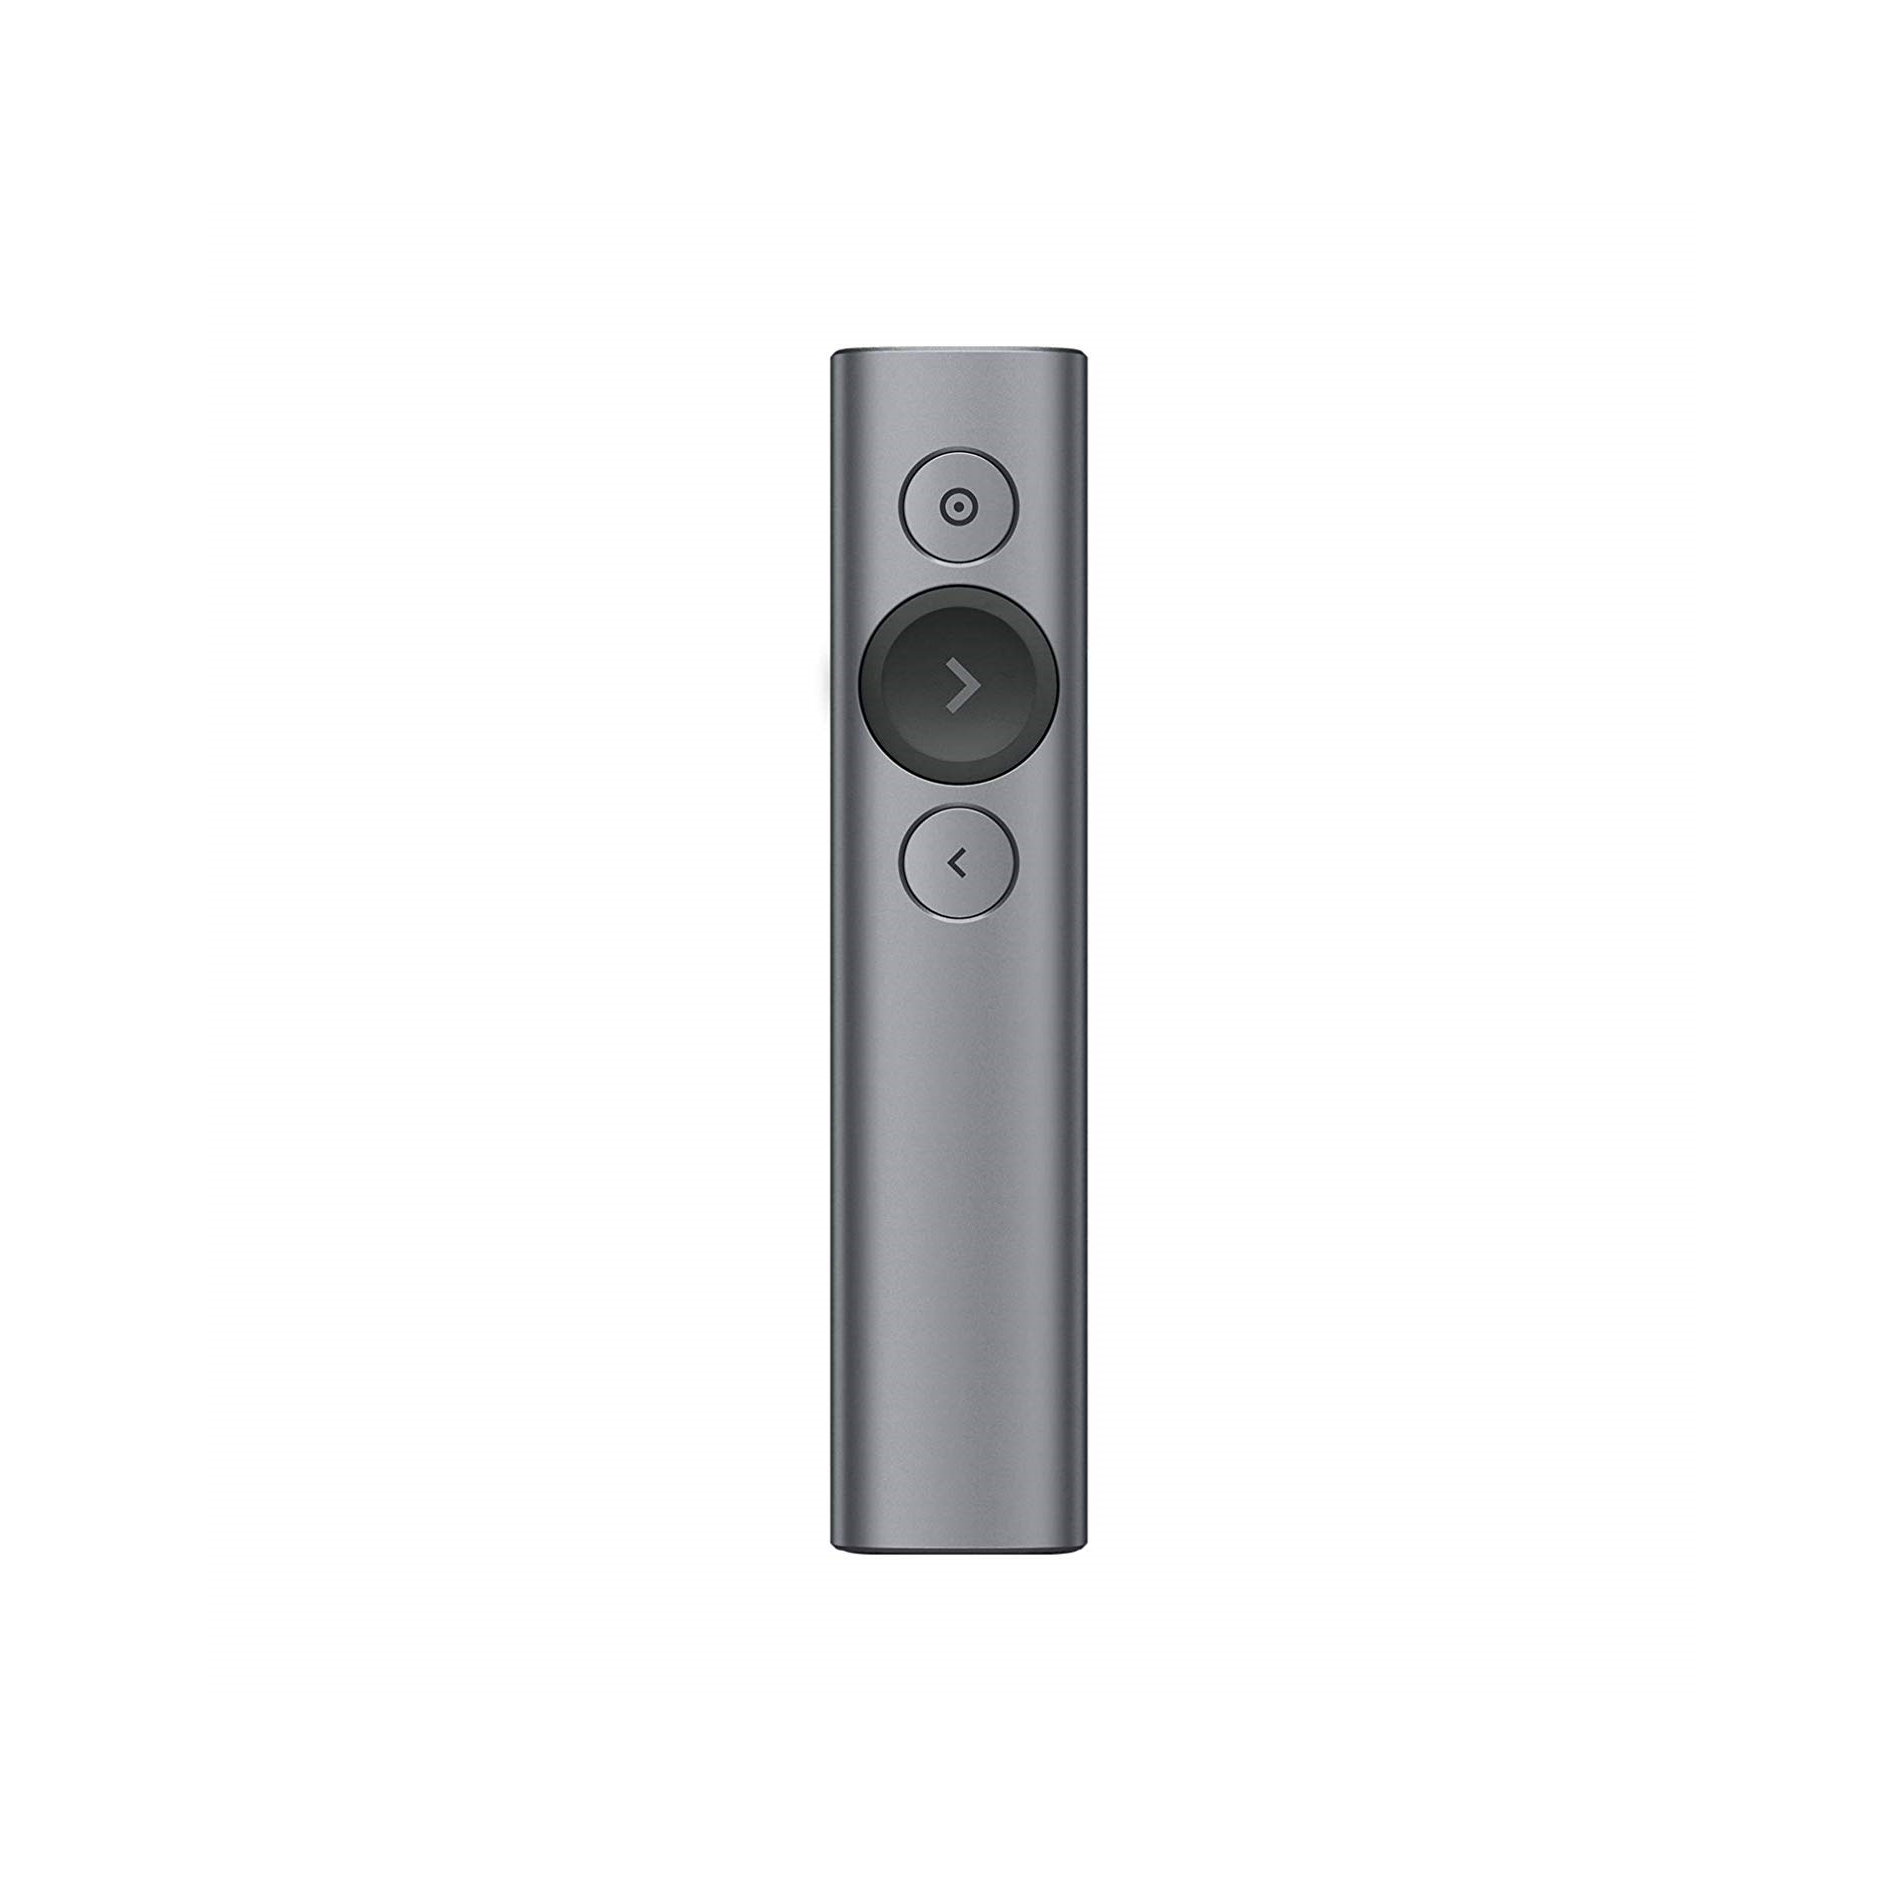 Logitech Spotlight Presentation Remote An advanced digital pointer that works in-person, virtually, or a hybrid of both.